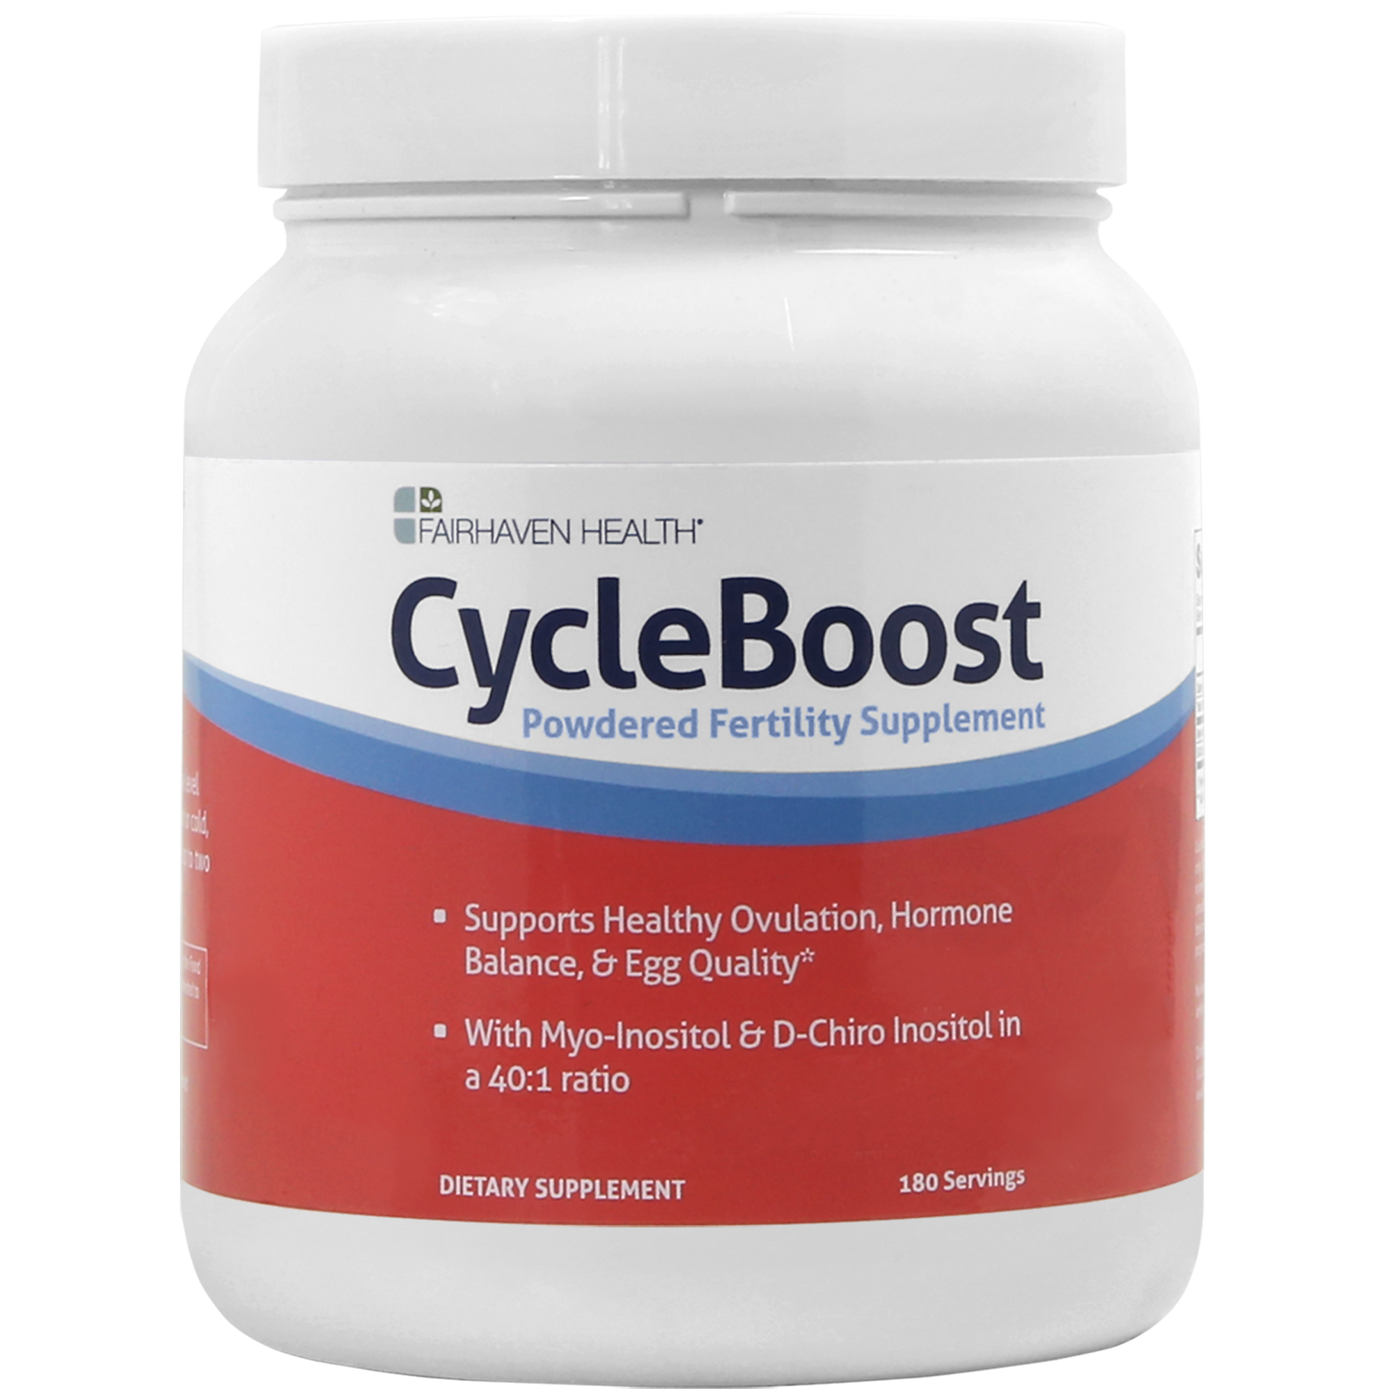 CycleBoost ings Curated Wellness